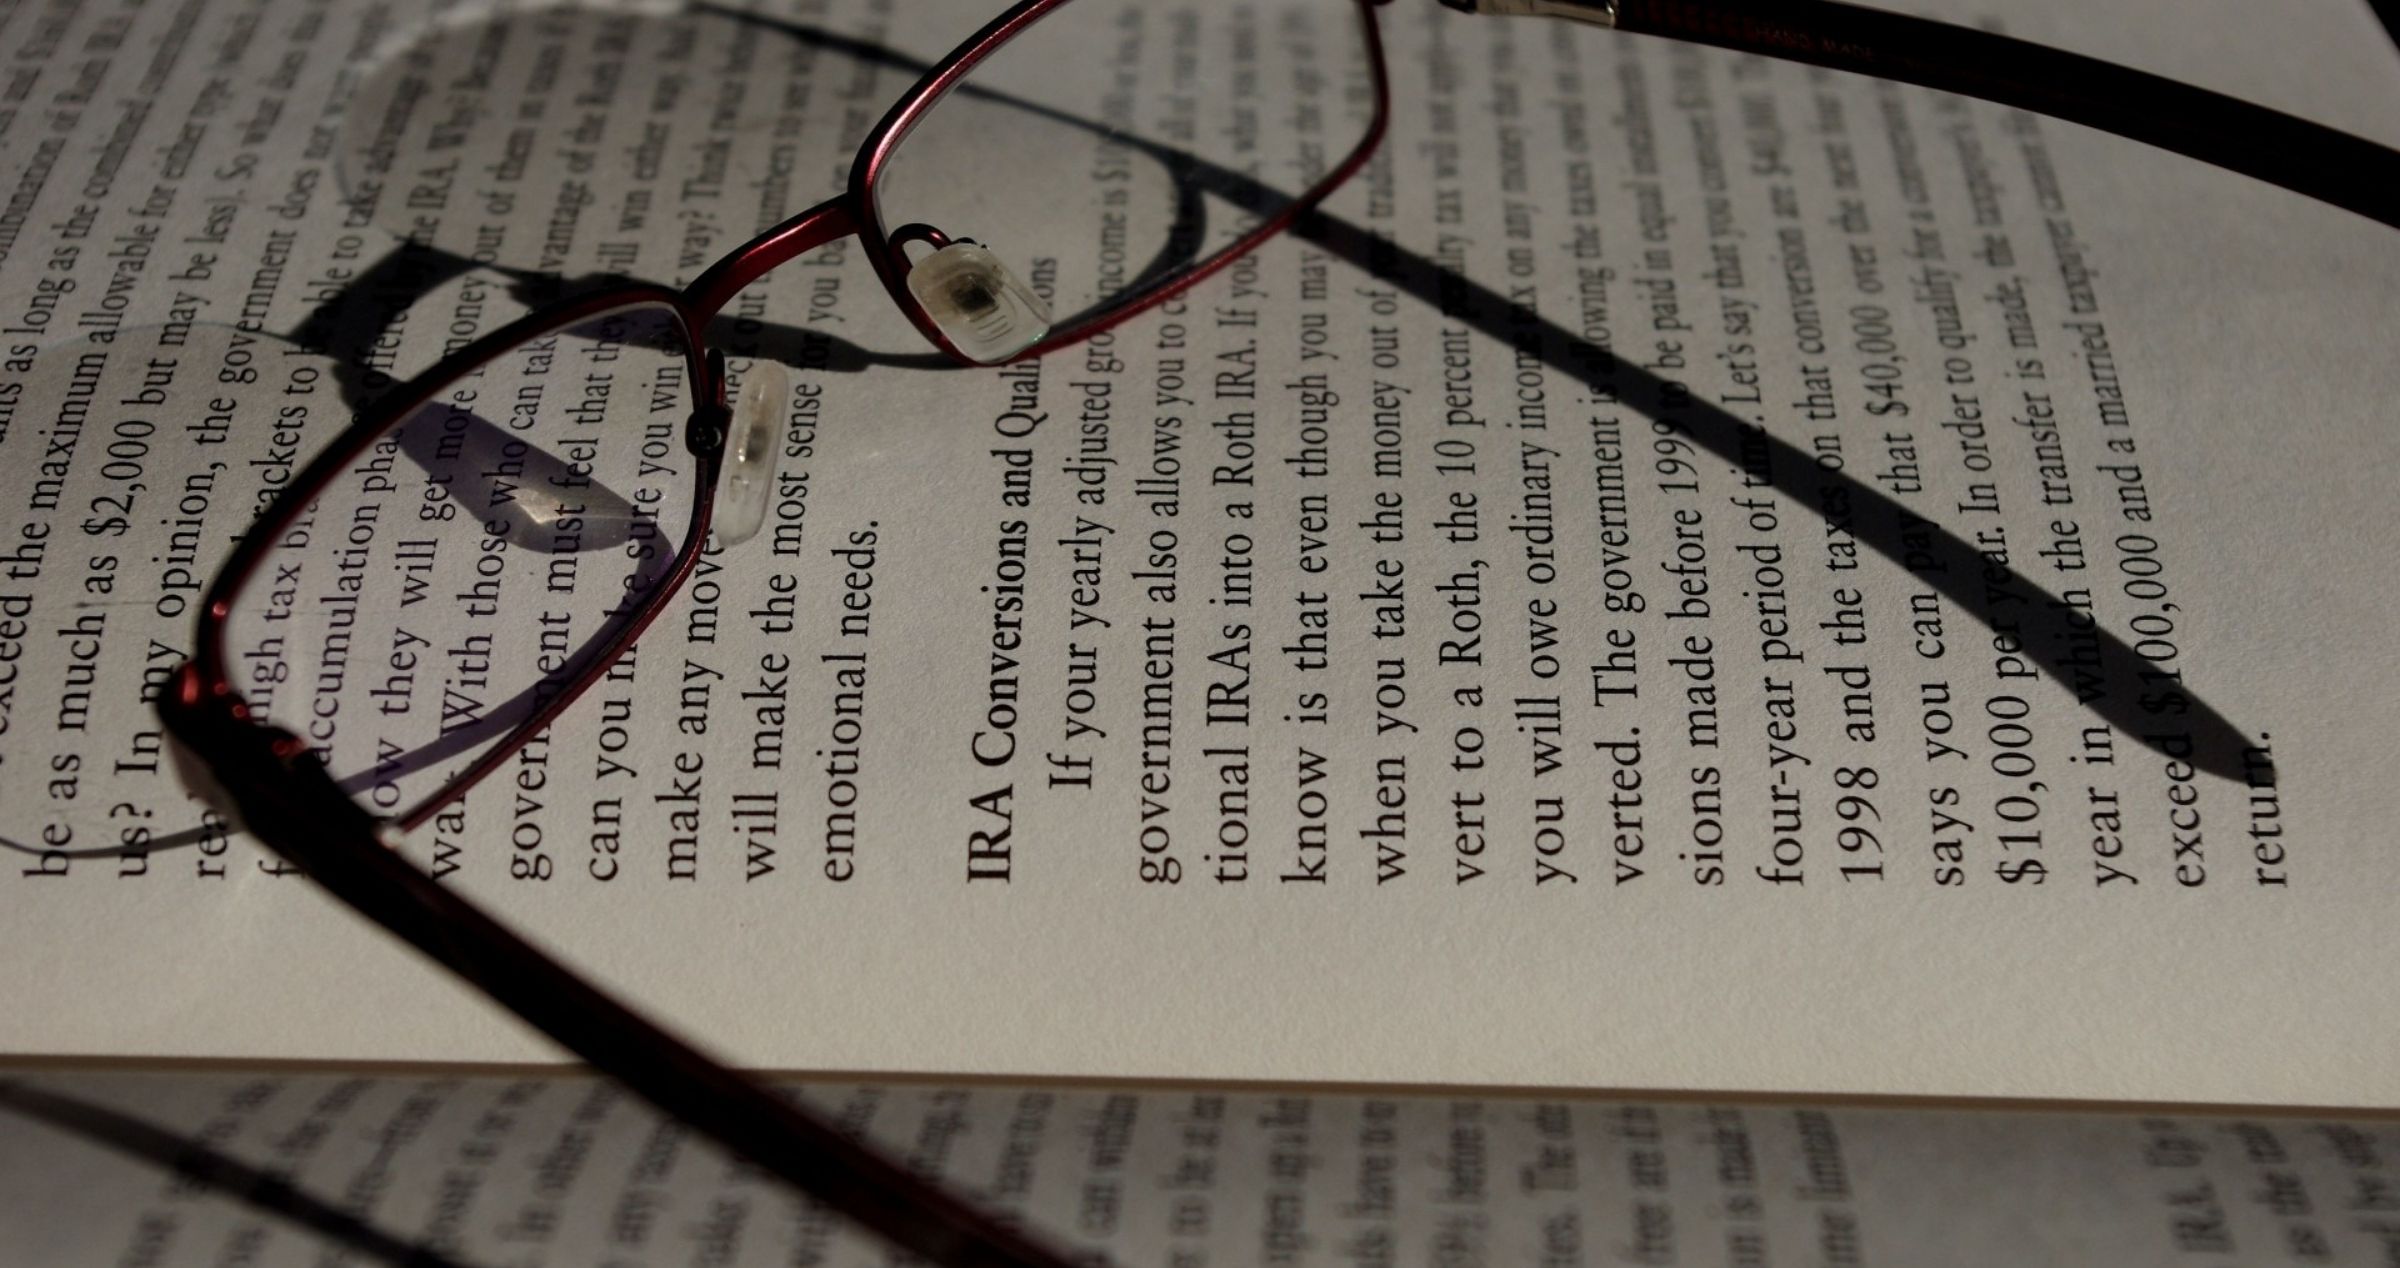 Image of reading glasses sitting on an open book